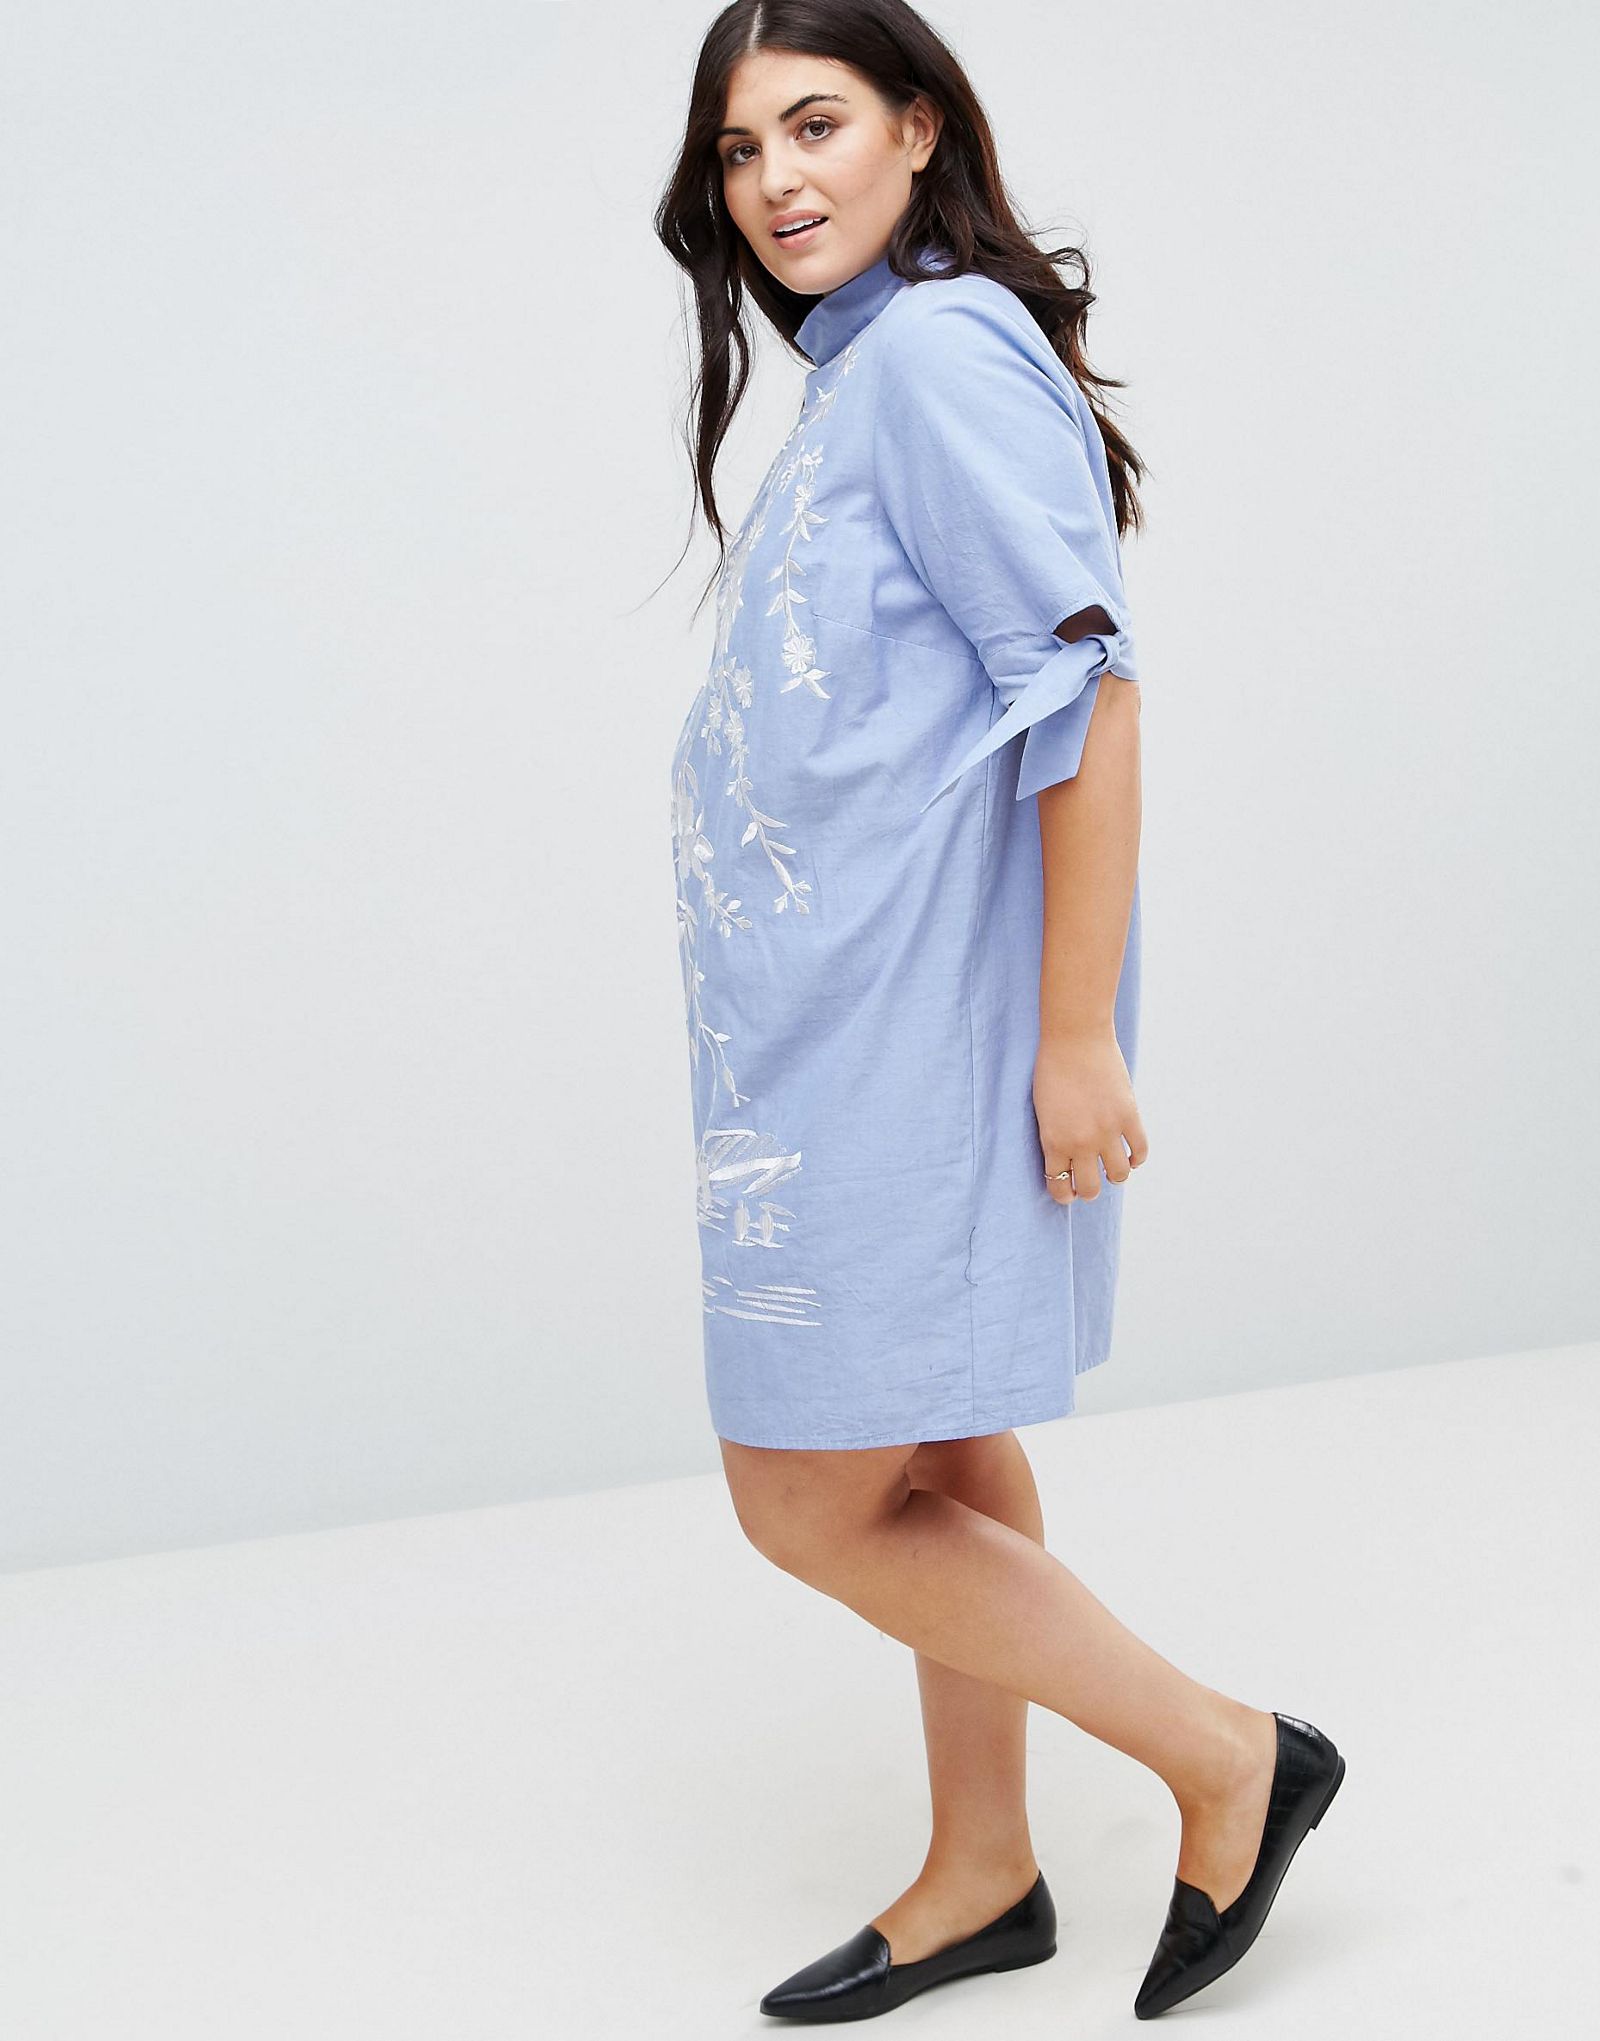 ASOS CURVE Chambray Shift Dress with Embroidery